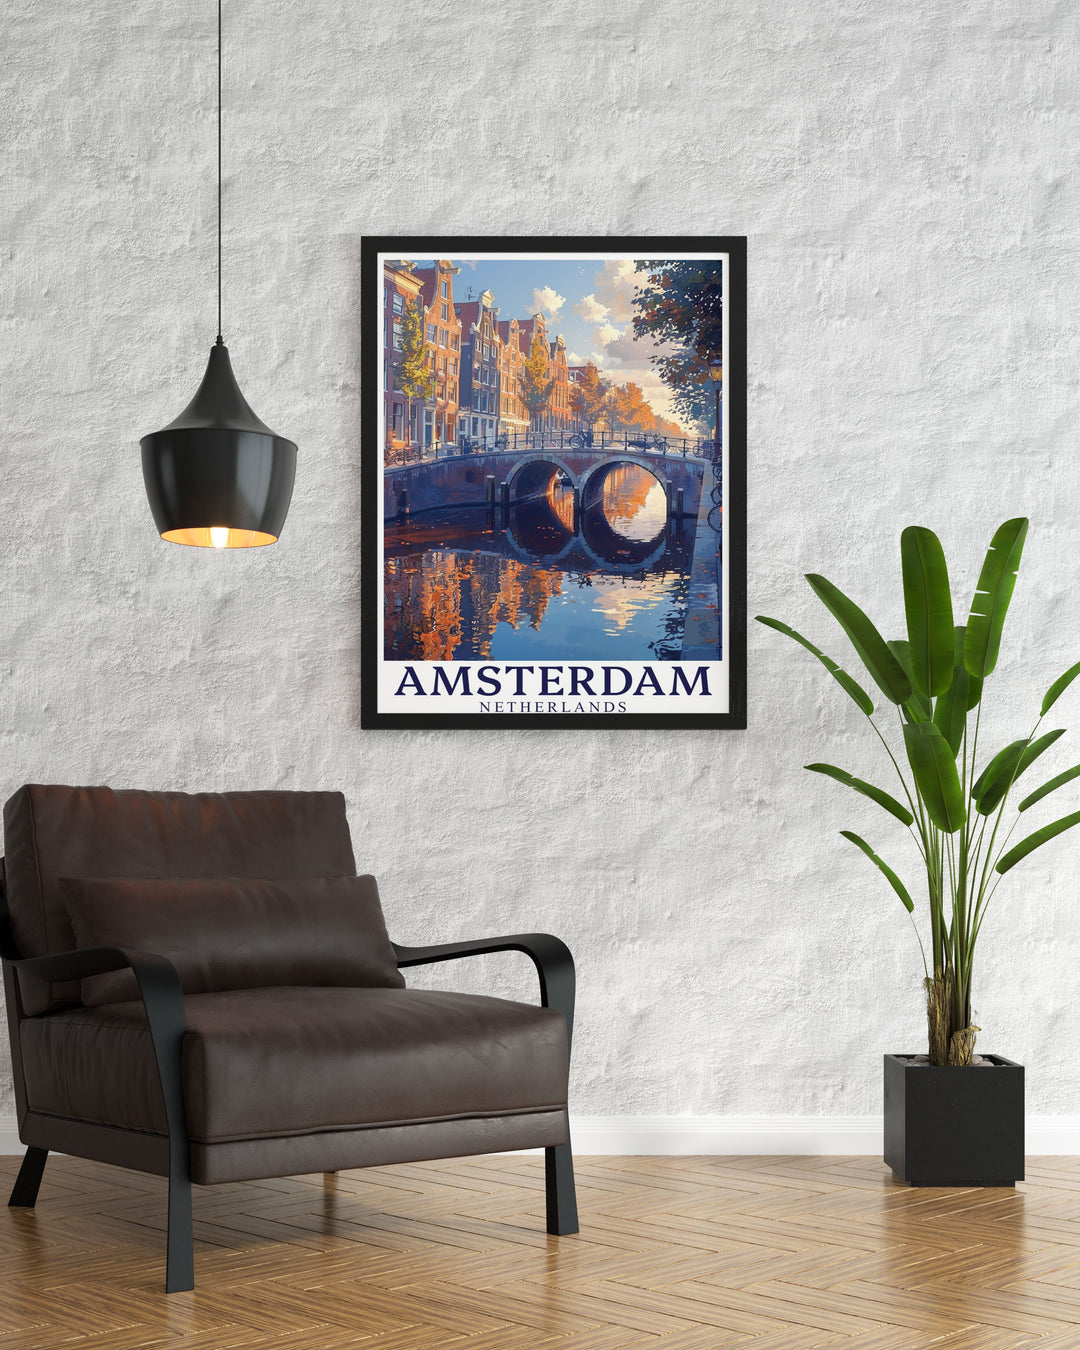 Elegant Amsterdam photo of the Canal Arch Grachtengordel. A perfect addition to your Amsterdam decor collection. This Amsterdam art print showcases the citys picturesque canals and charming architecture. Ideal for those who love city prints and fine line art.